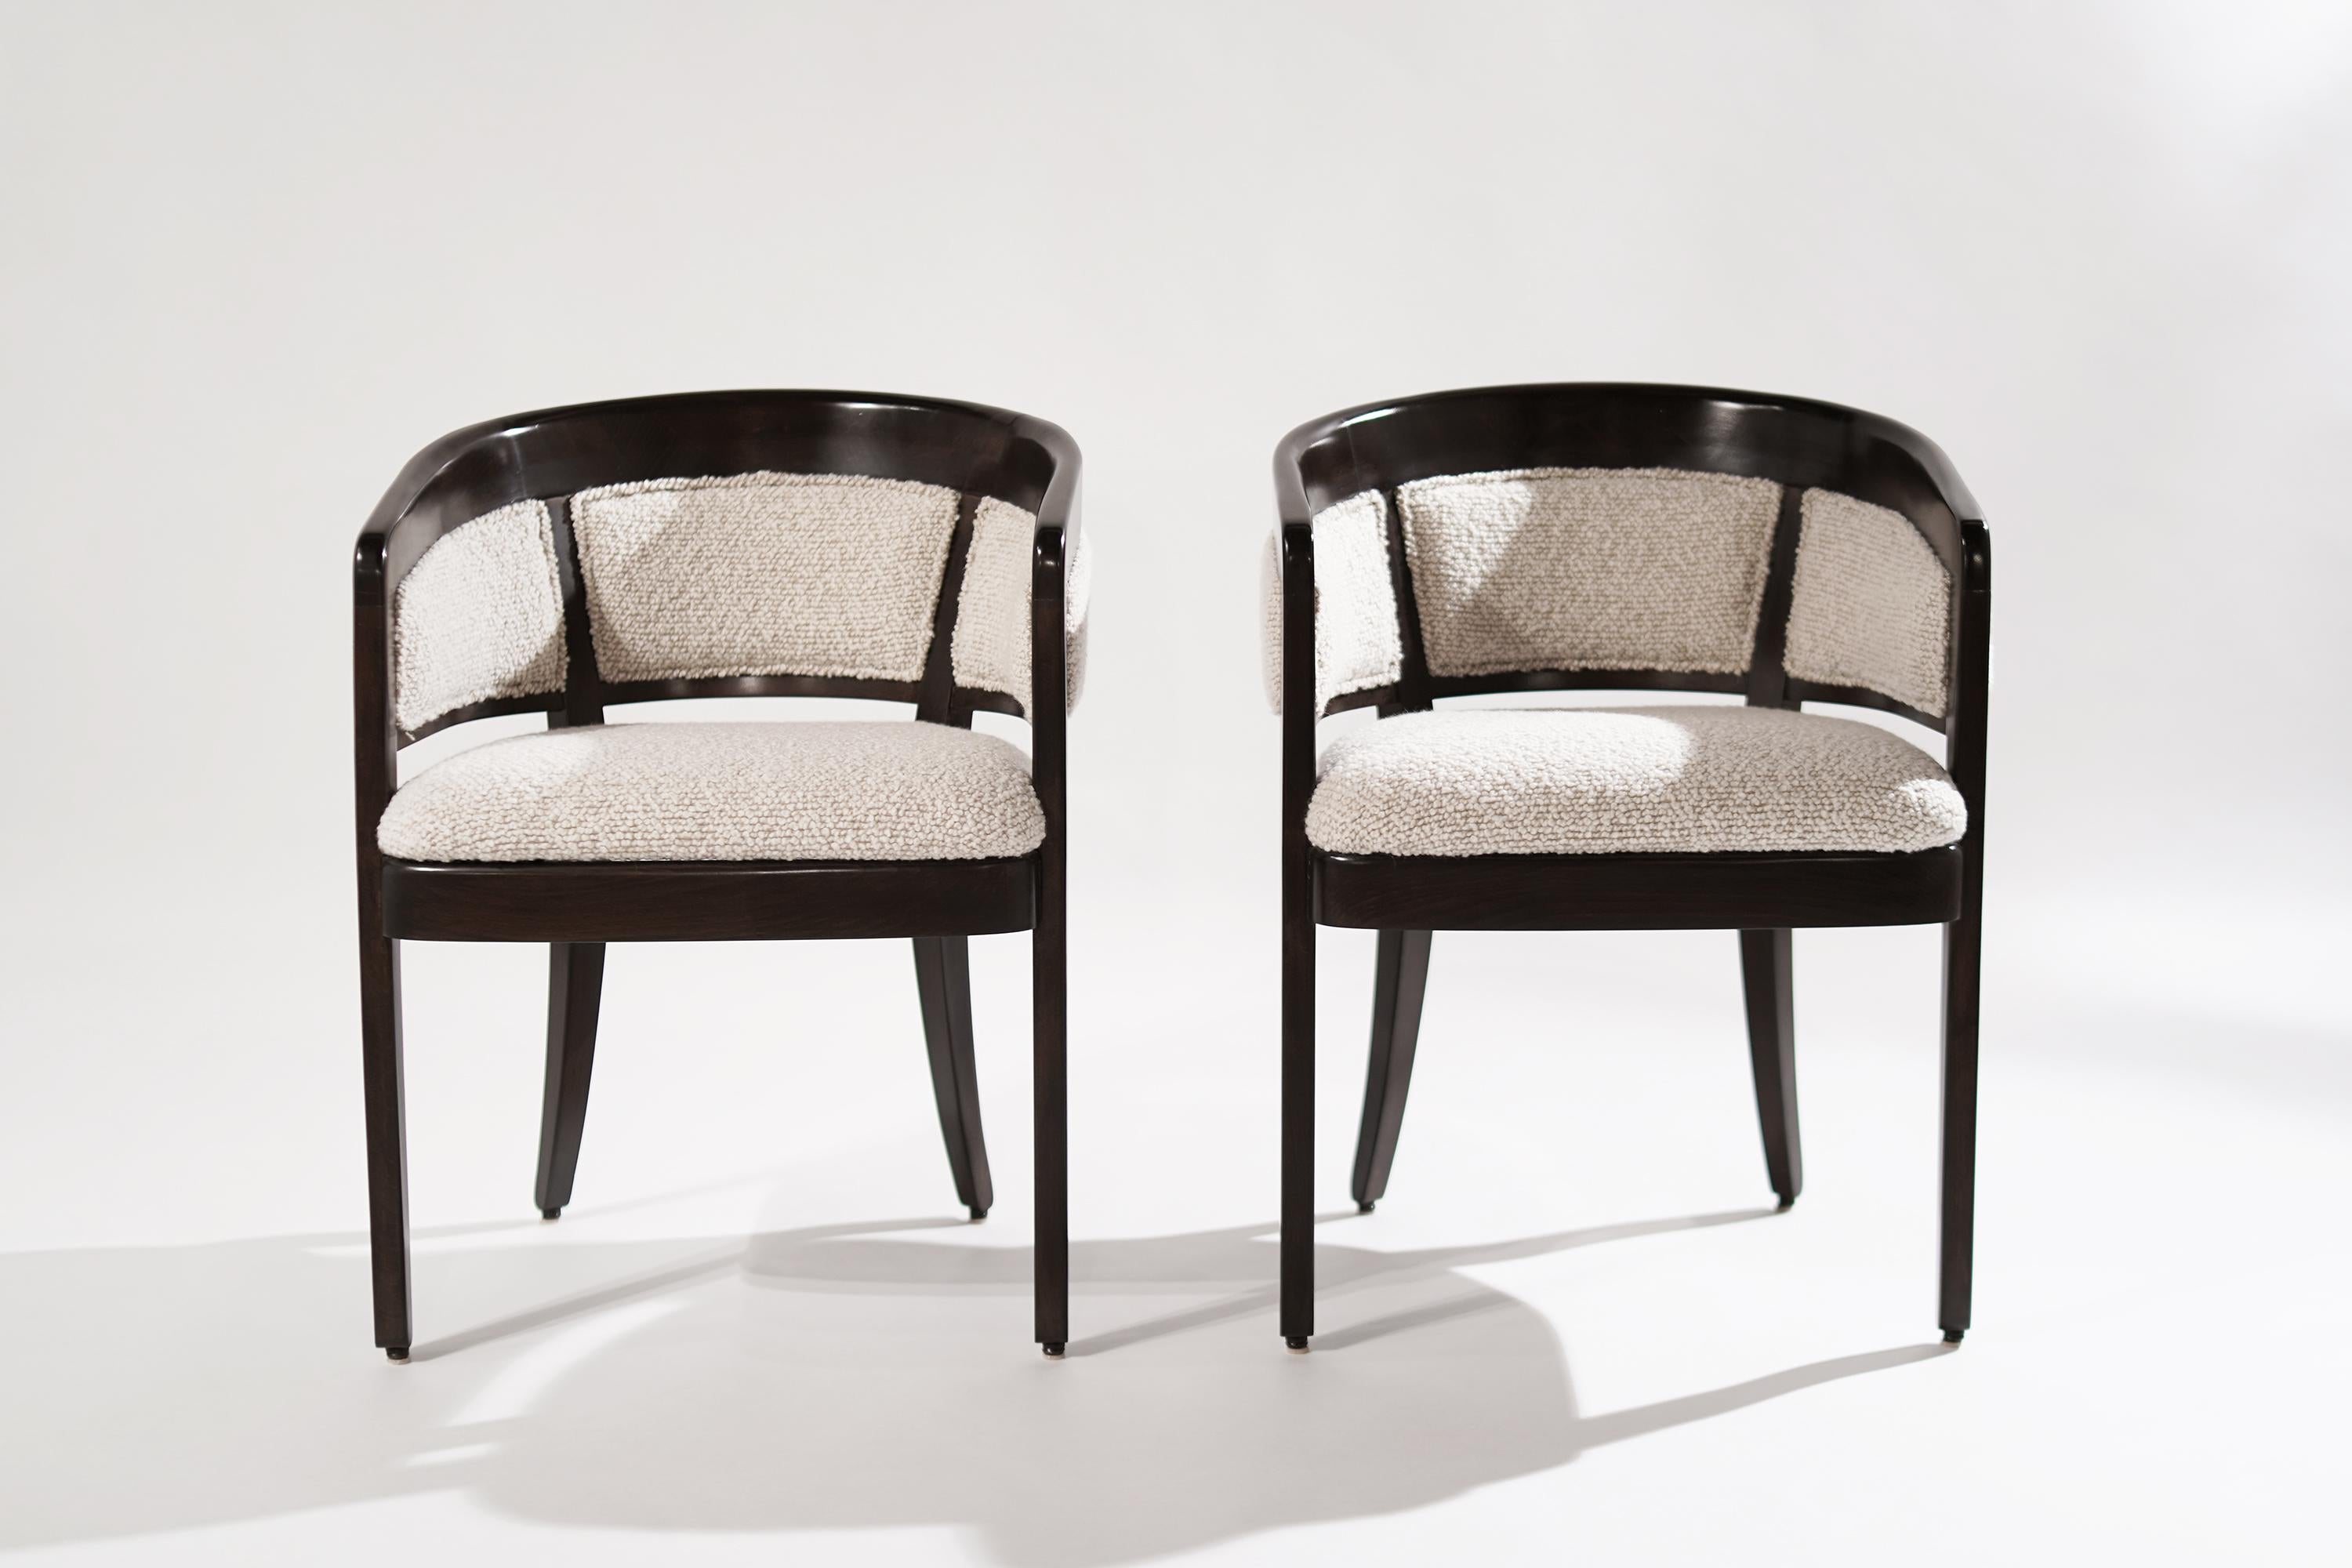 A set of armchairs designed by Edward Wormley and manufactured by Drexel, circa 1960s. Completely restored and refinished in espresso. Newly upholstered in a fantastic wool bouclé by Kravet.

Other designers from this period include Paul McCobb,